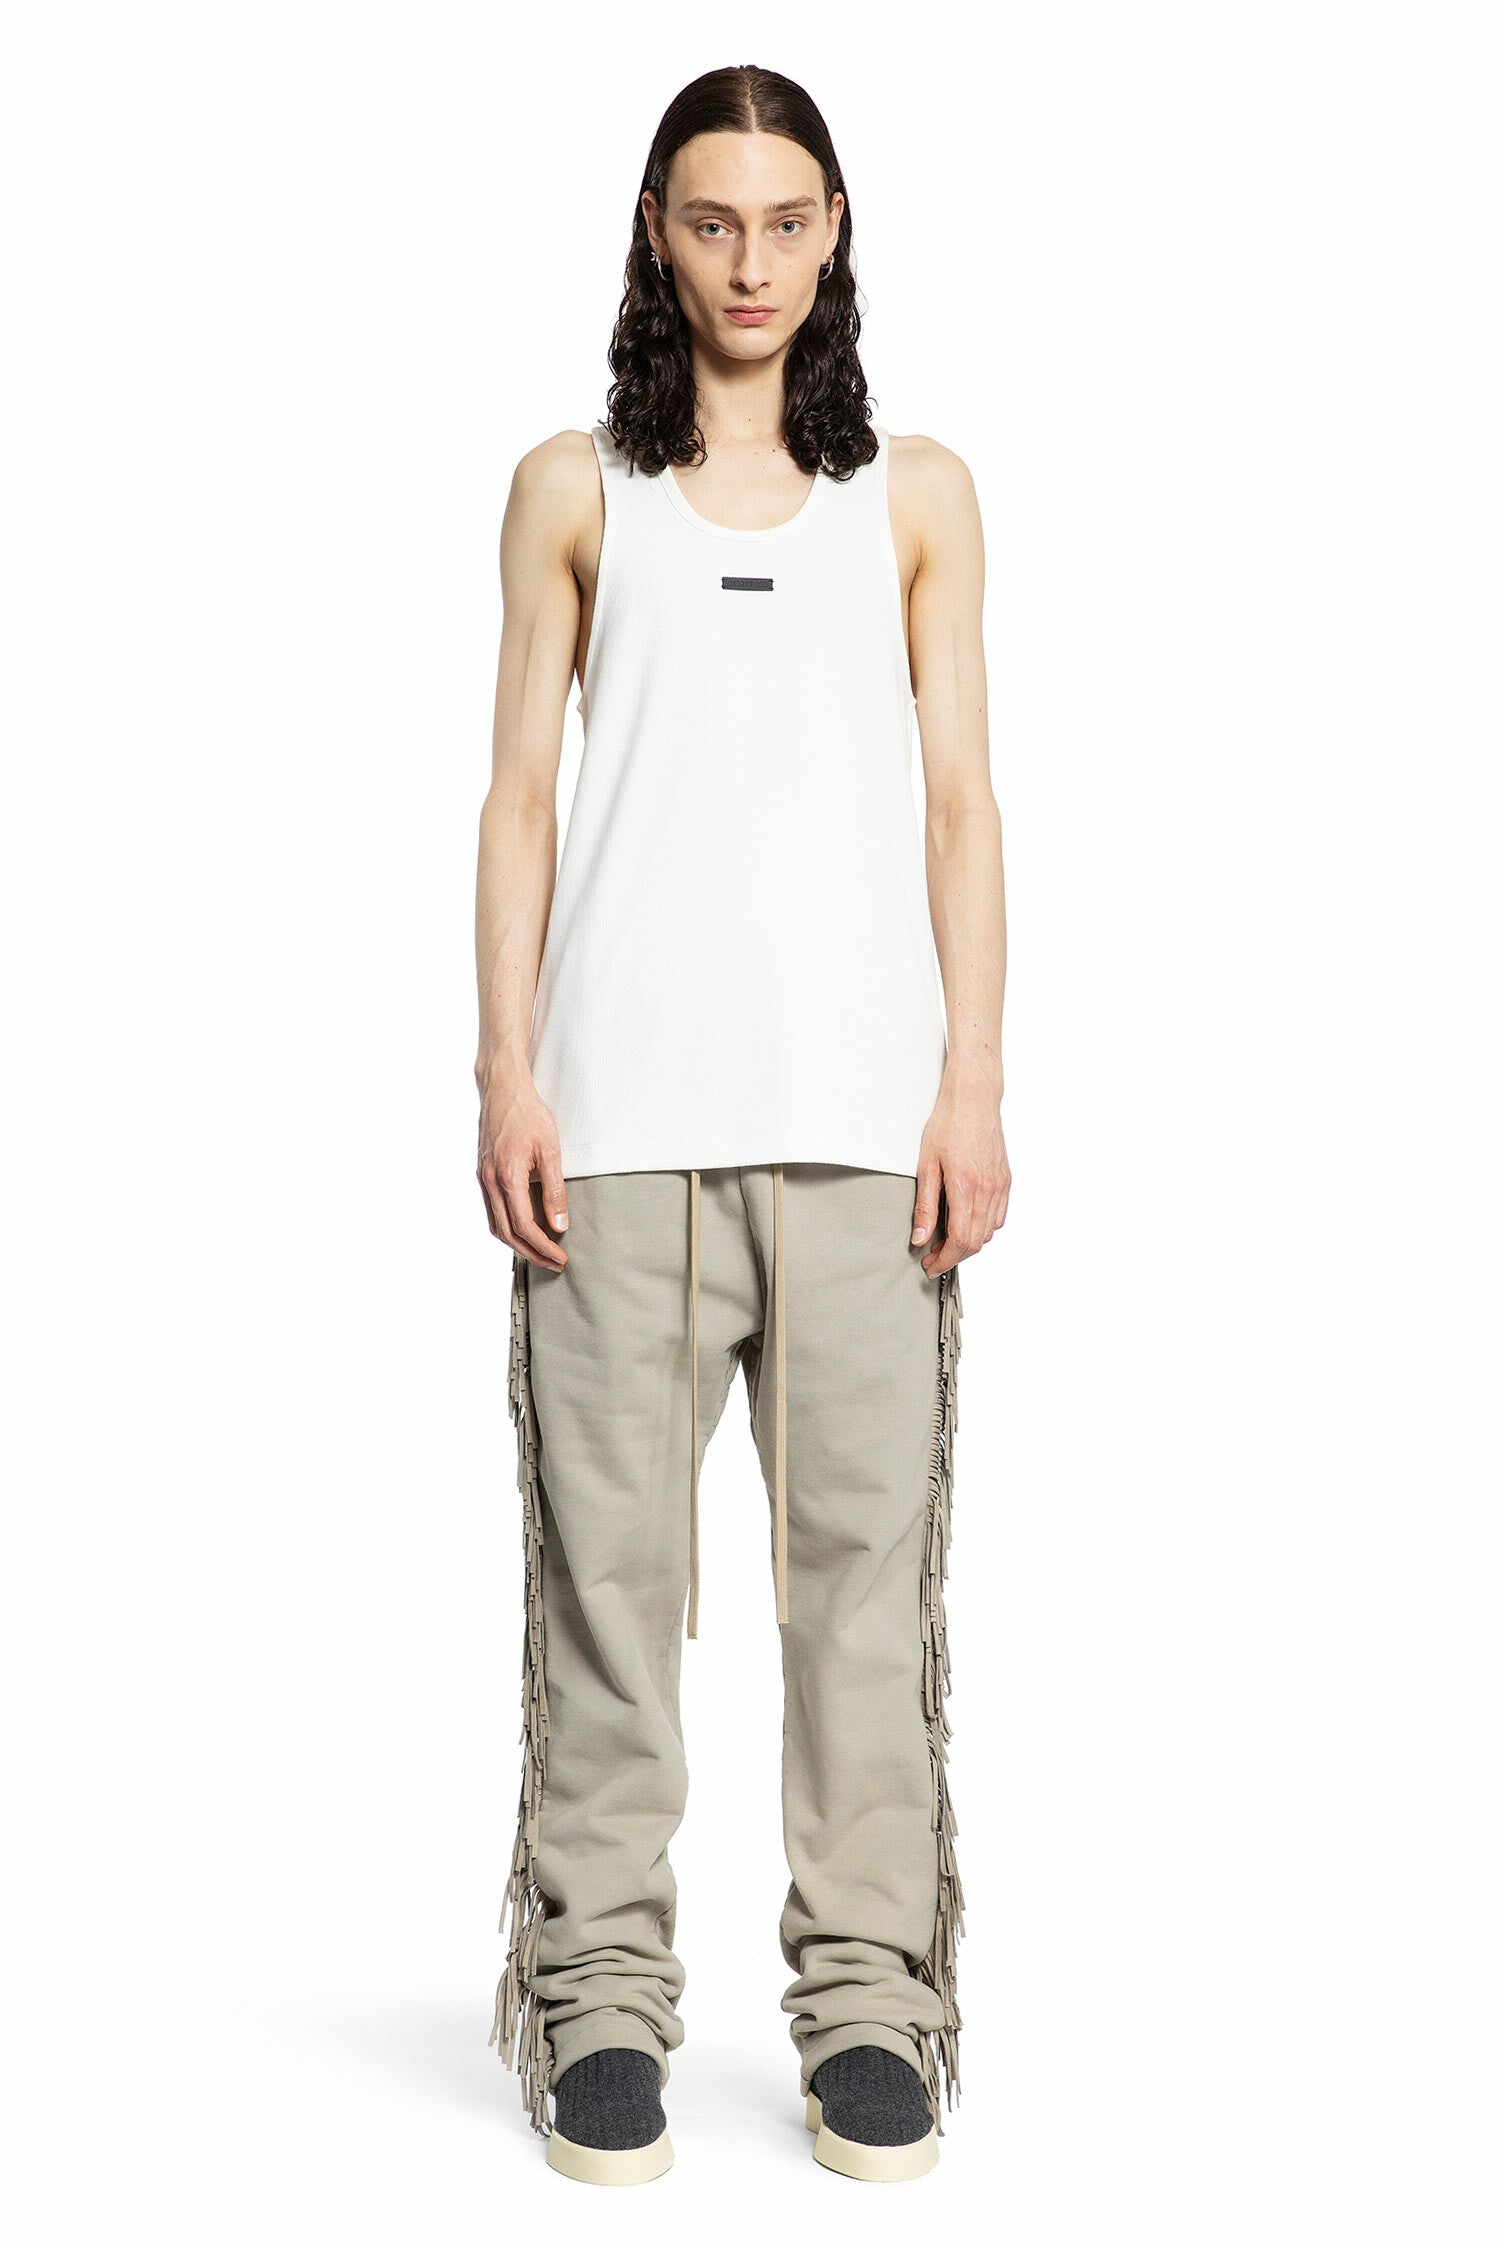 FEAR OF GOD MAN WHITE T-SHIRTS & TANK TOPS